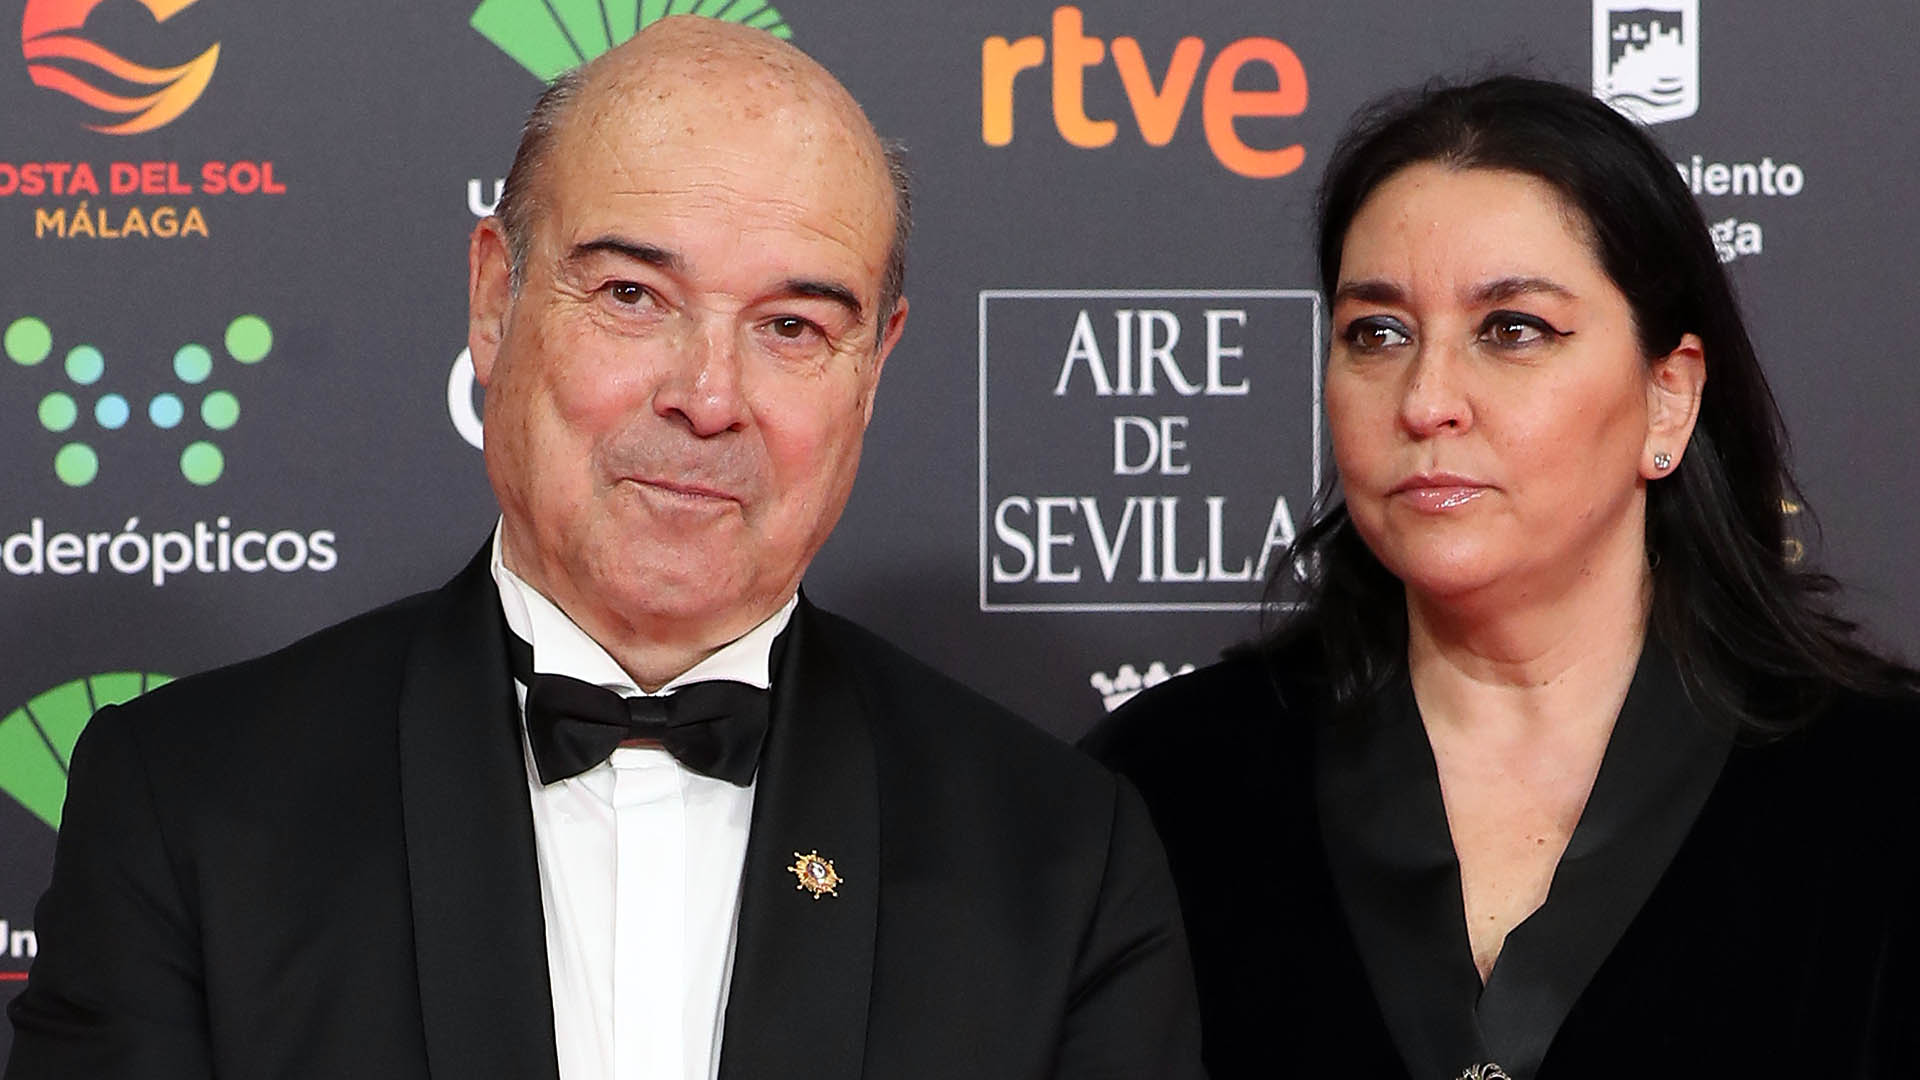 Actor Antonio Resines and Ana Perez Lorente at photocall of the 34th annual Goya Film Awards in Malaga on Saturday, 25 January 2020.